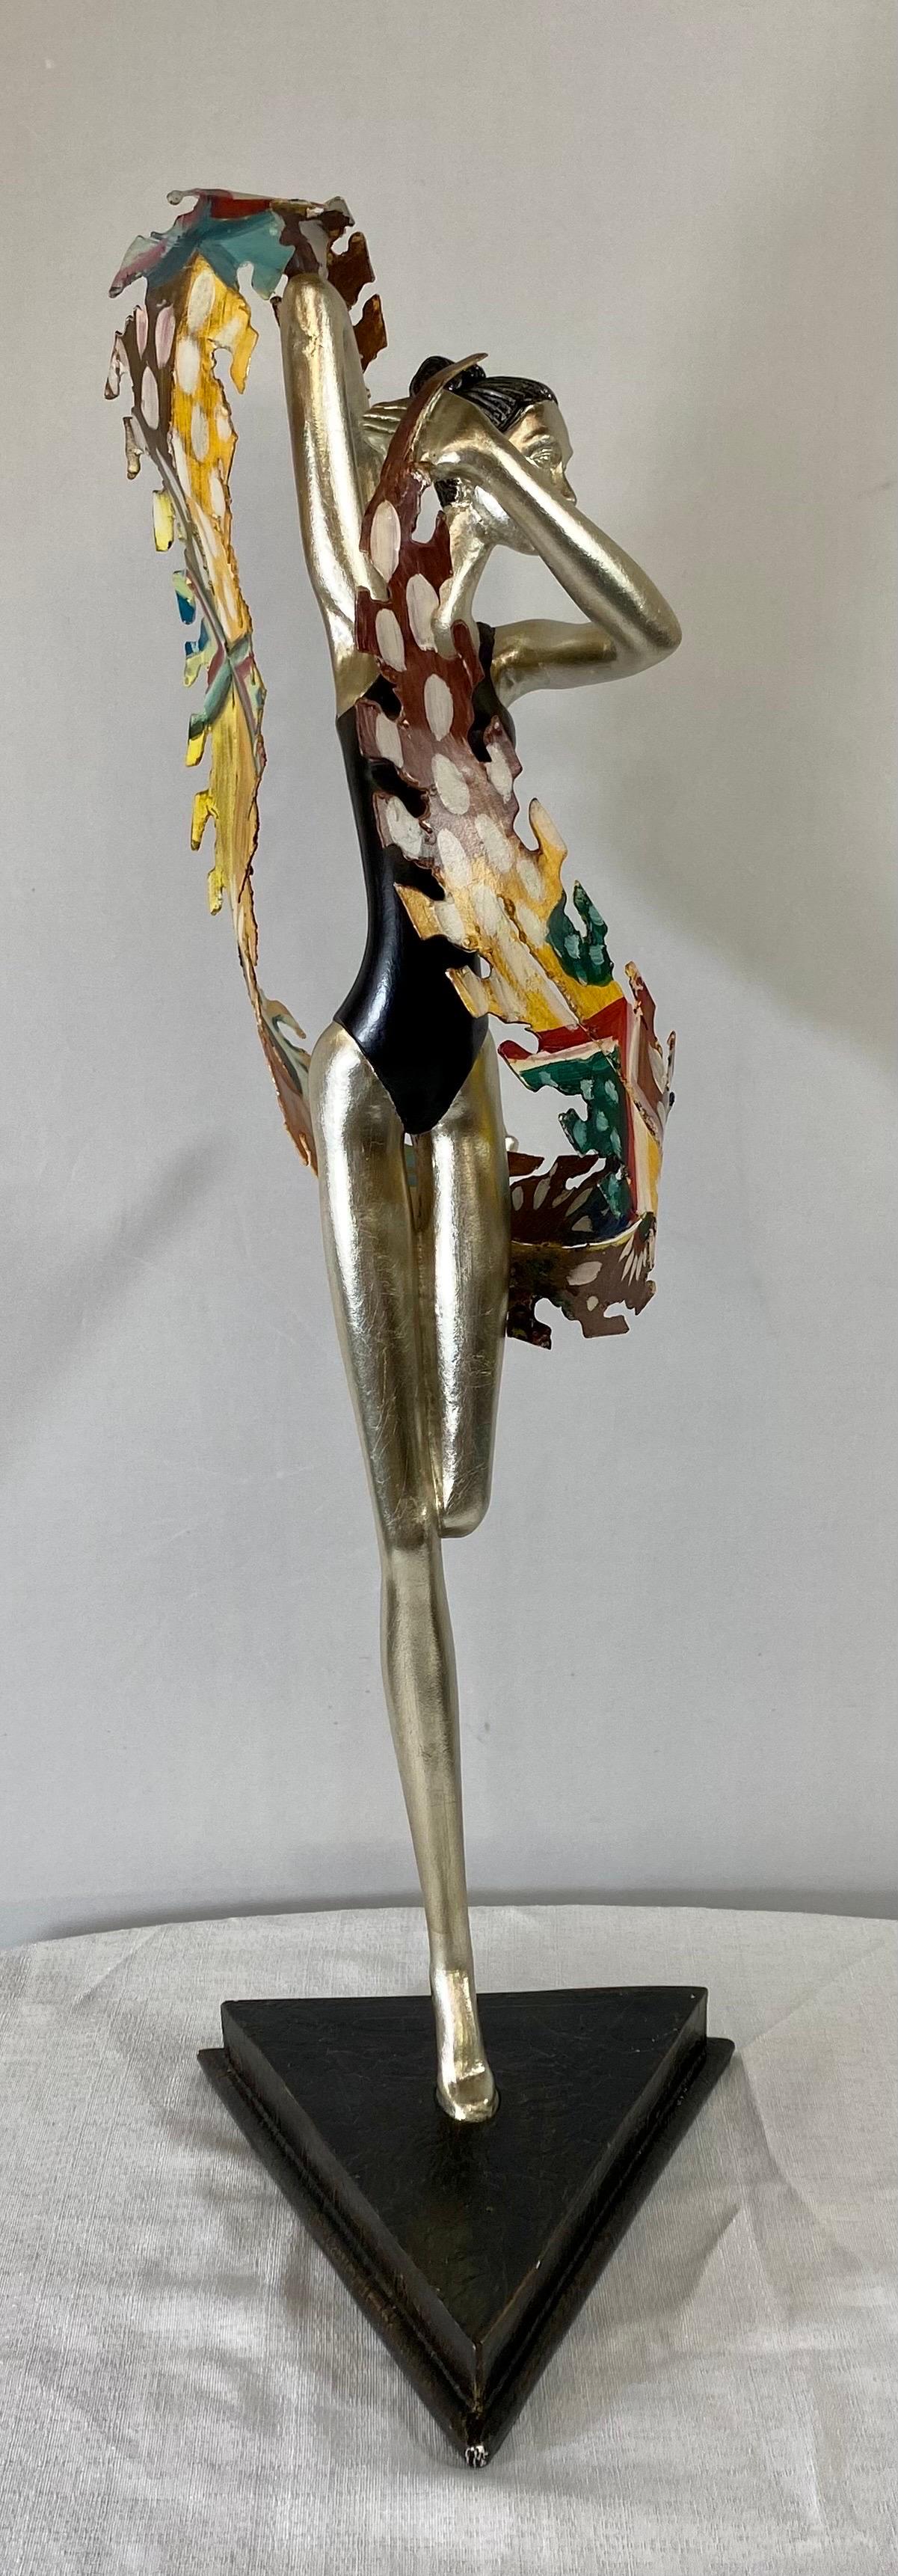 An elegant French Art Deco ballerina sculpture made of iron and resin. The sculpture depicts a dancing ballerina exuding grace and elegance through her lean body and dancing position. Holding a dancing scarf made of iron in multi-colors, the